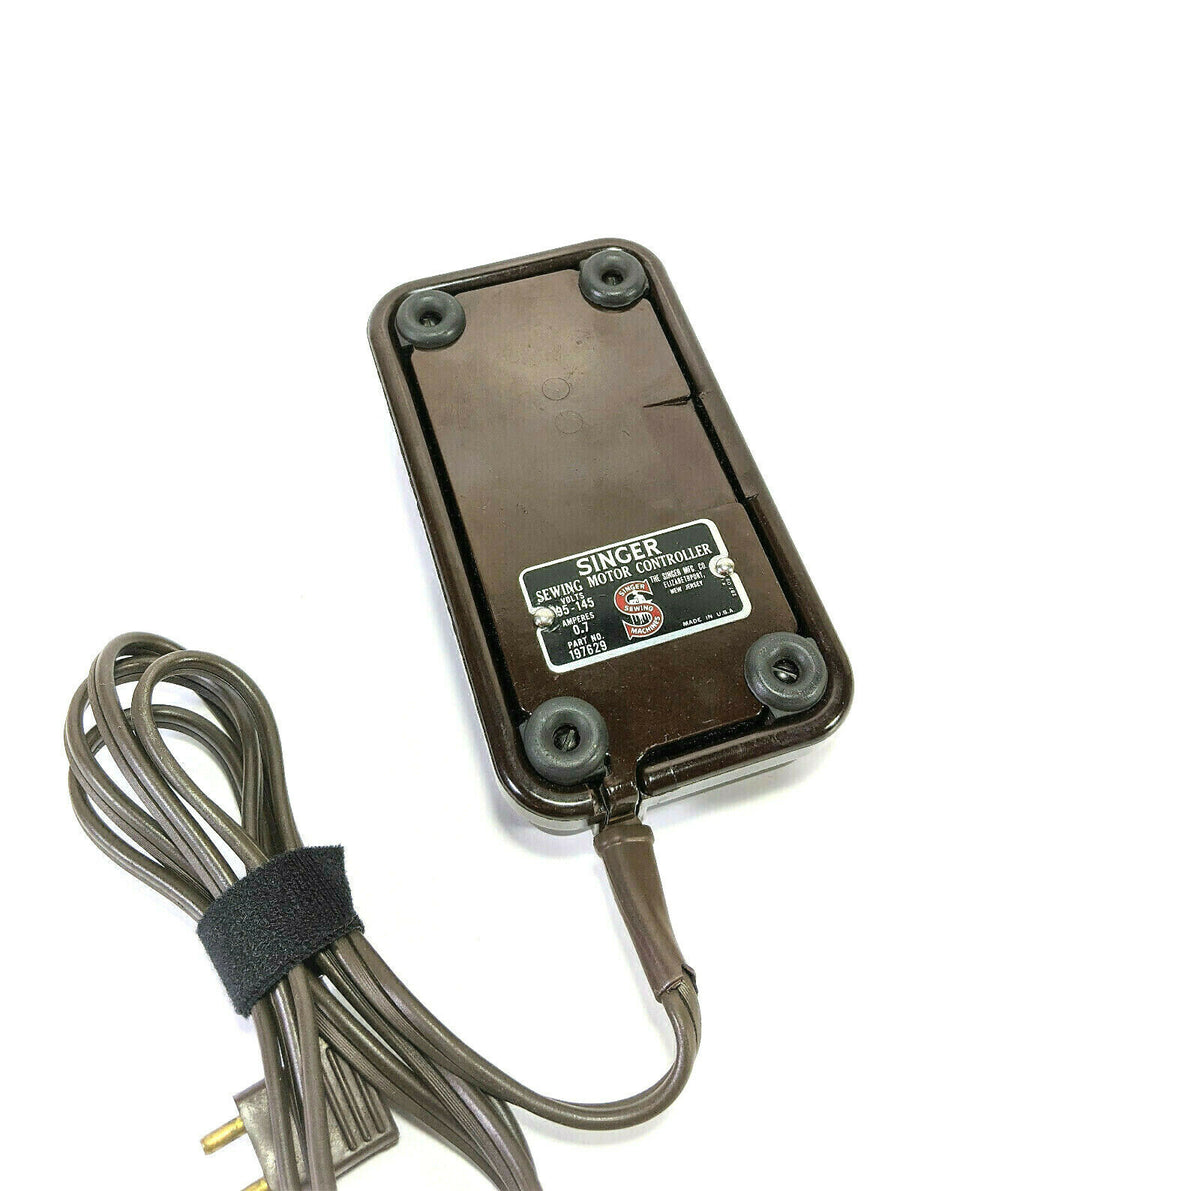 SINGER SEWING MACHINE SPEED CONTROLLER FOOT PEDAL, BROWN, CR304